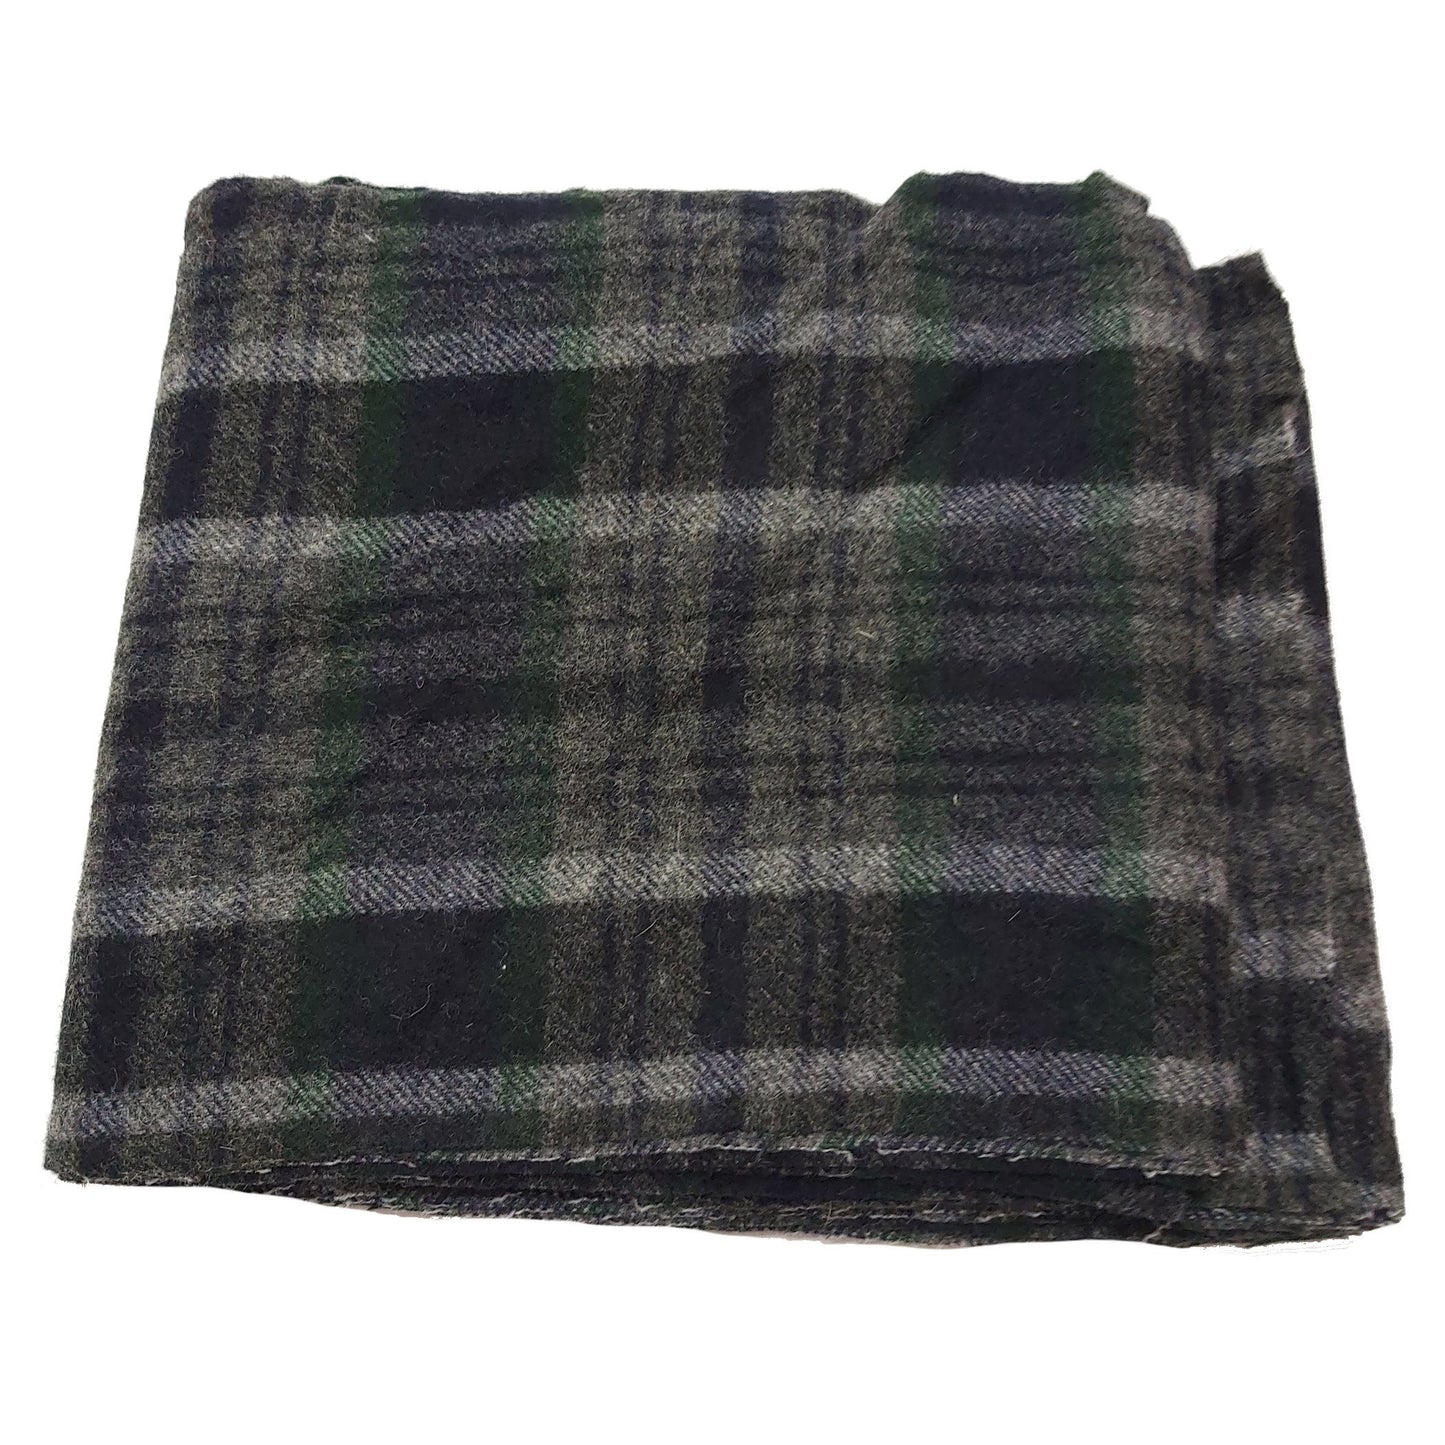 Tweed Fabric - Grey Bottle Olive Check 25cm wide Super Heavy 120